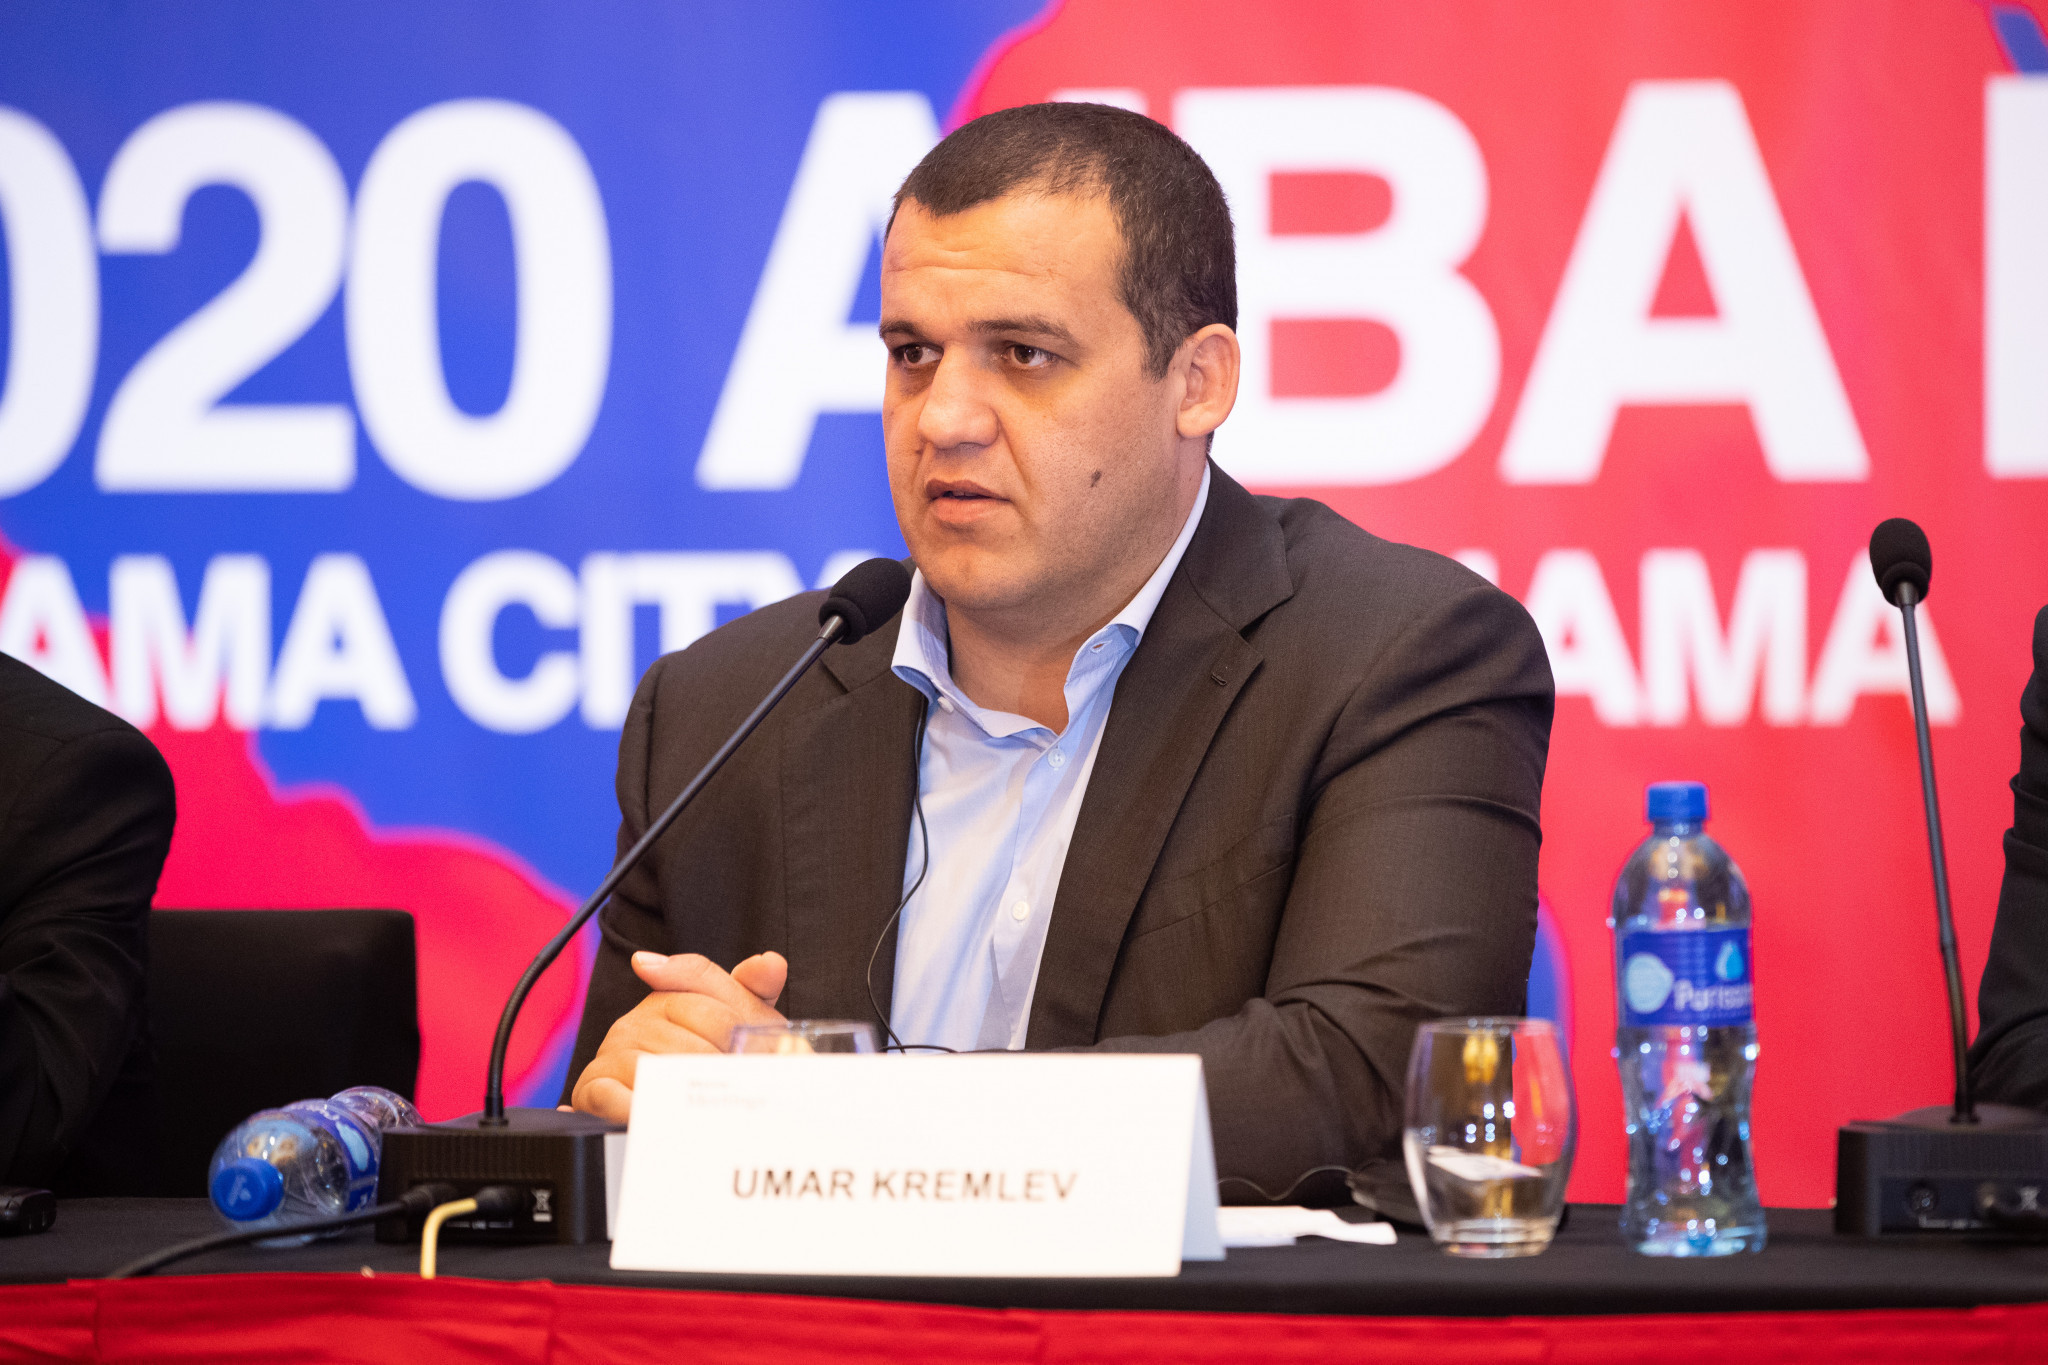 Exclusive: President Kremlev insists "AIBA will fulfil all of its financial obligations"